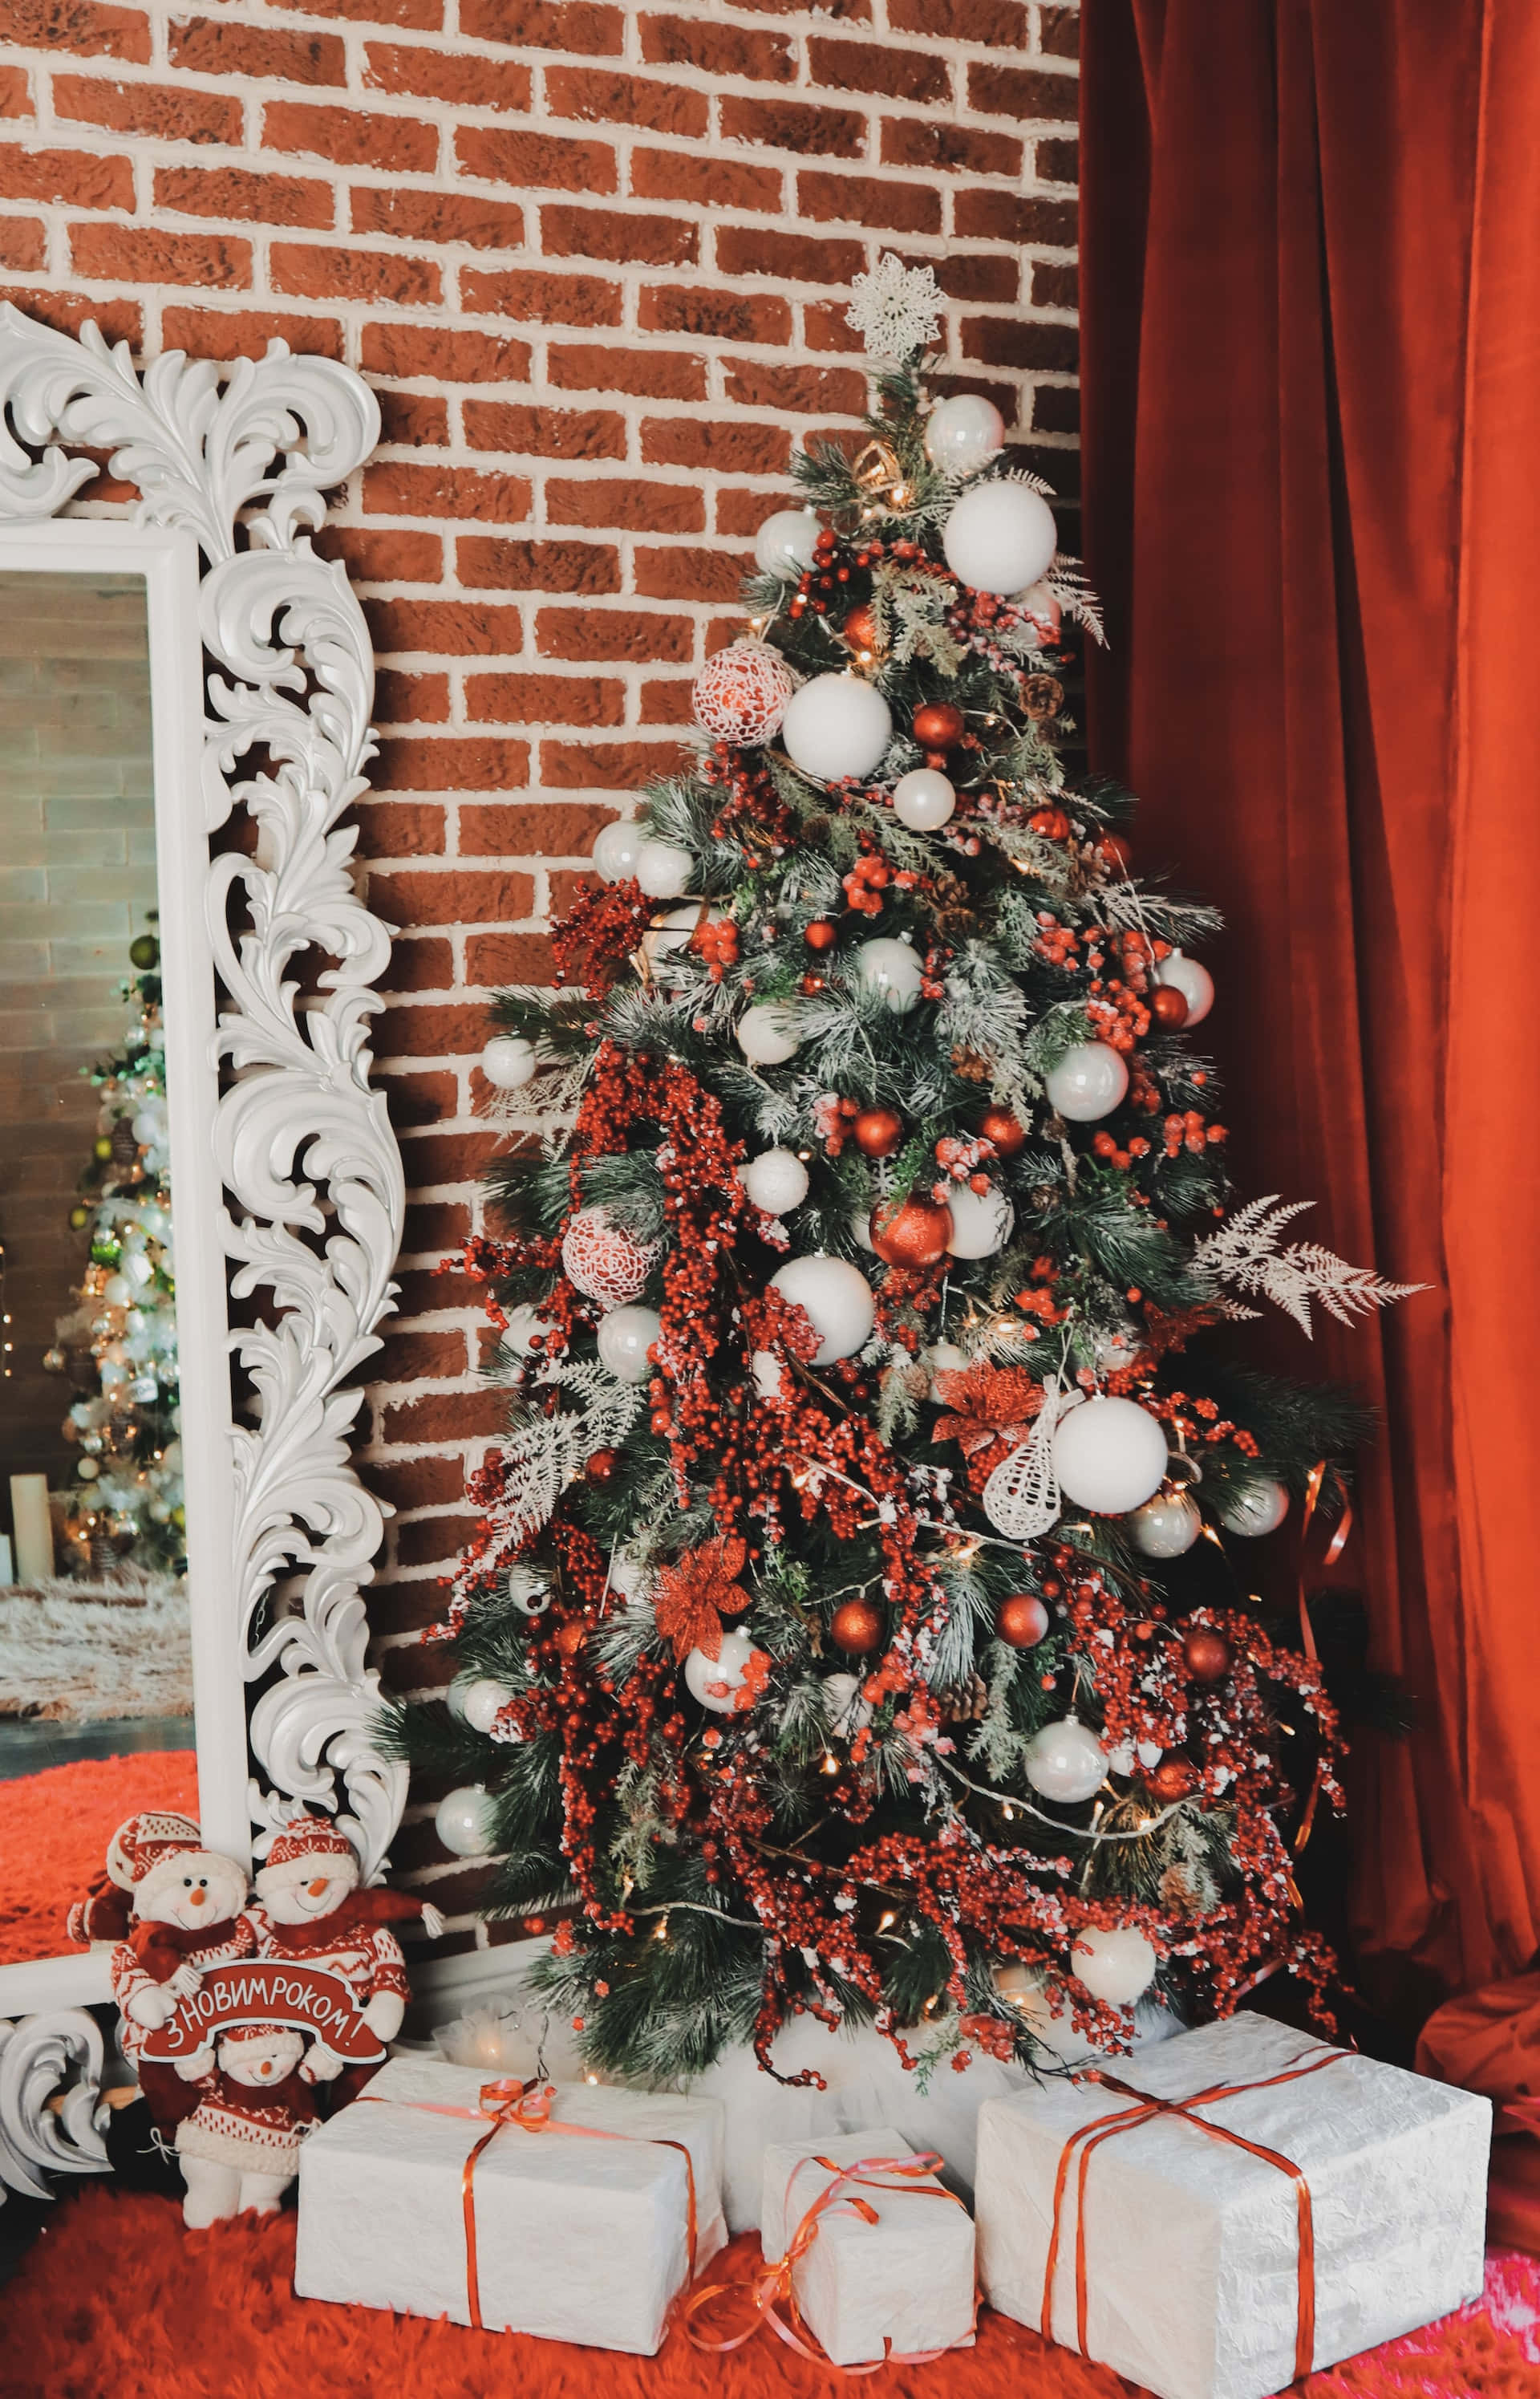 A beautiful aesthetic Christmas tree to brighten your holiday season. Wallpaper